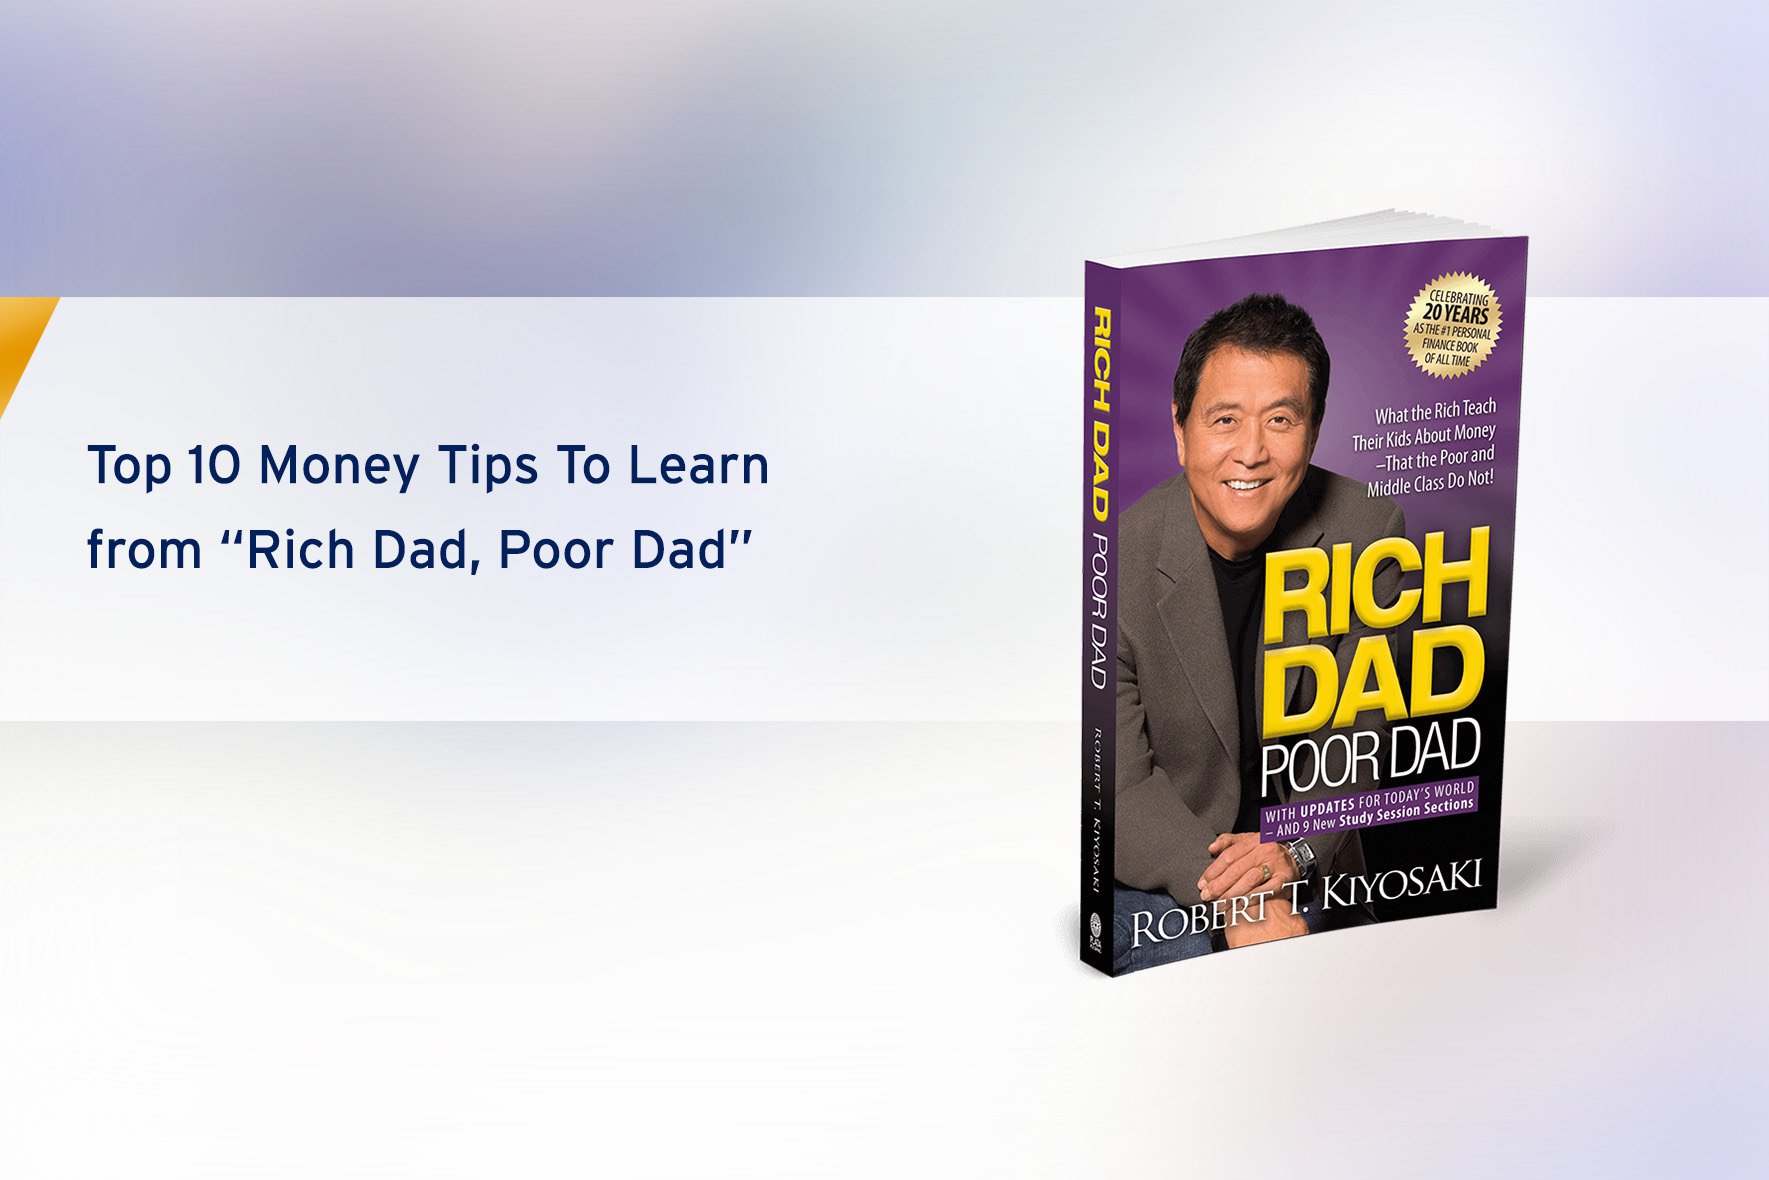  Rich Dad, Poor Dad: Break free from traditional financial thinking.